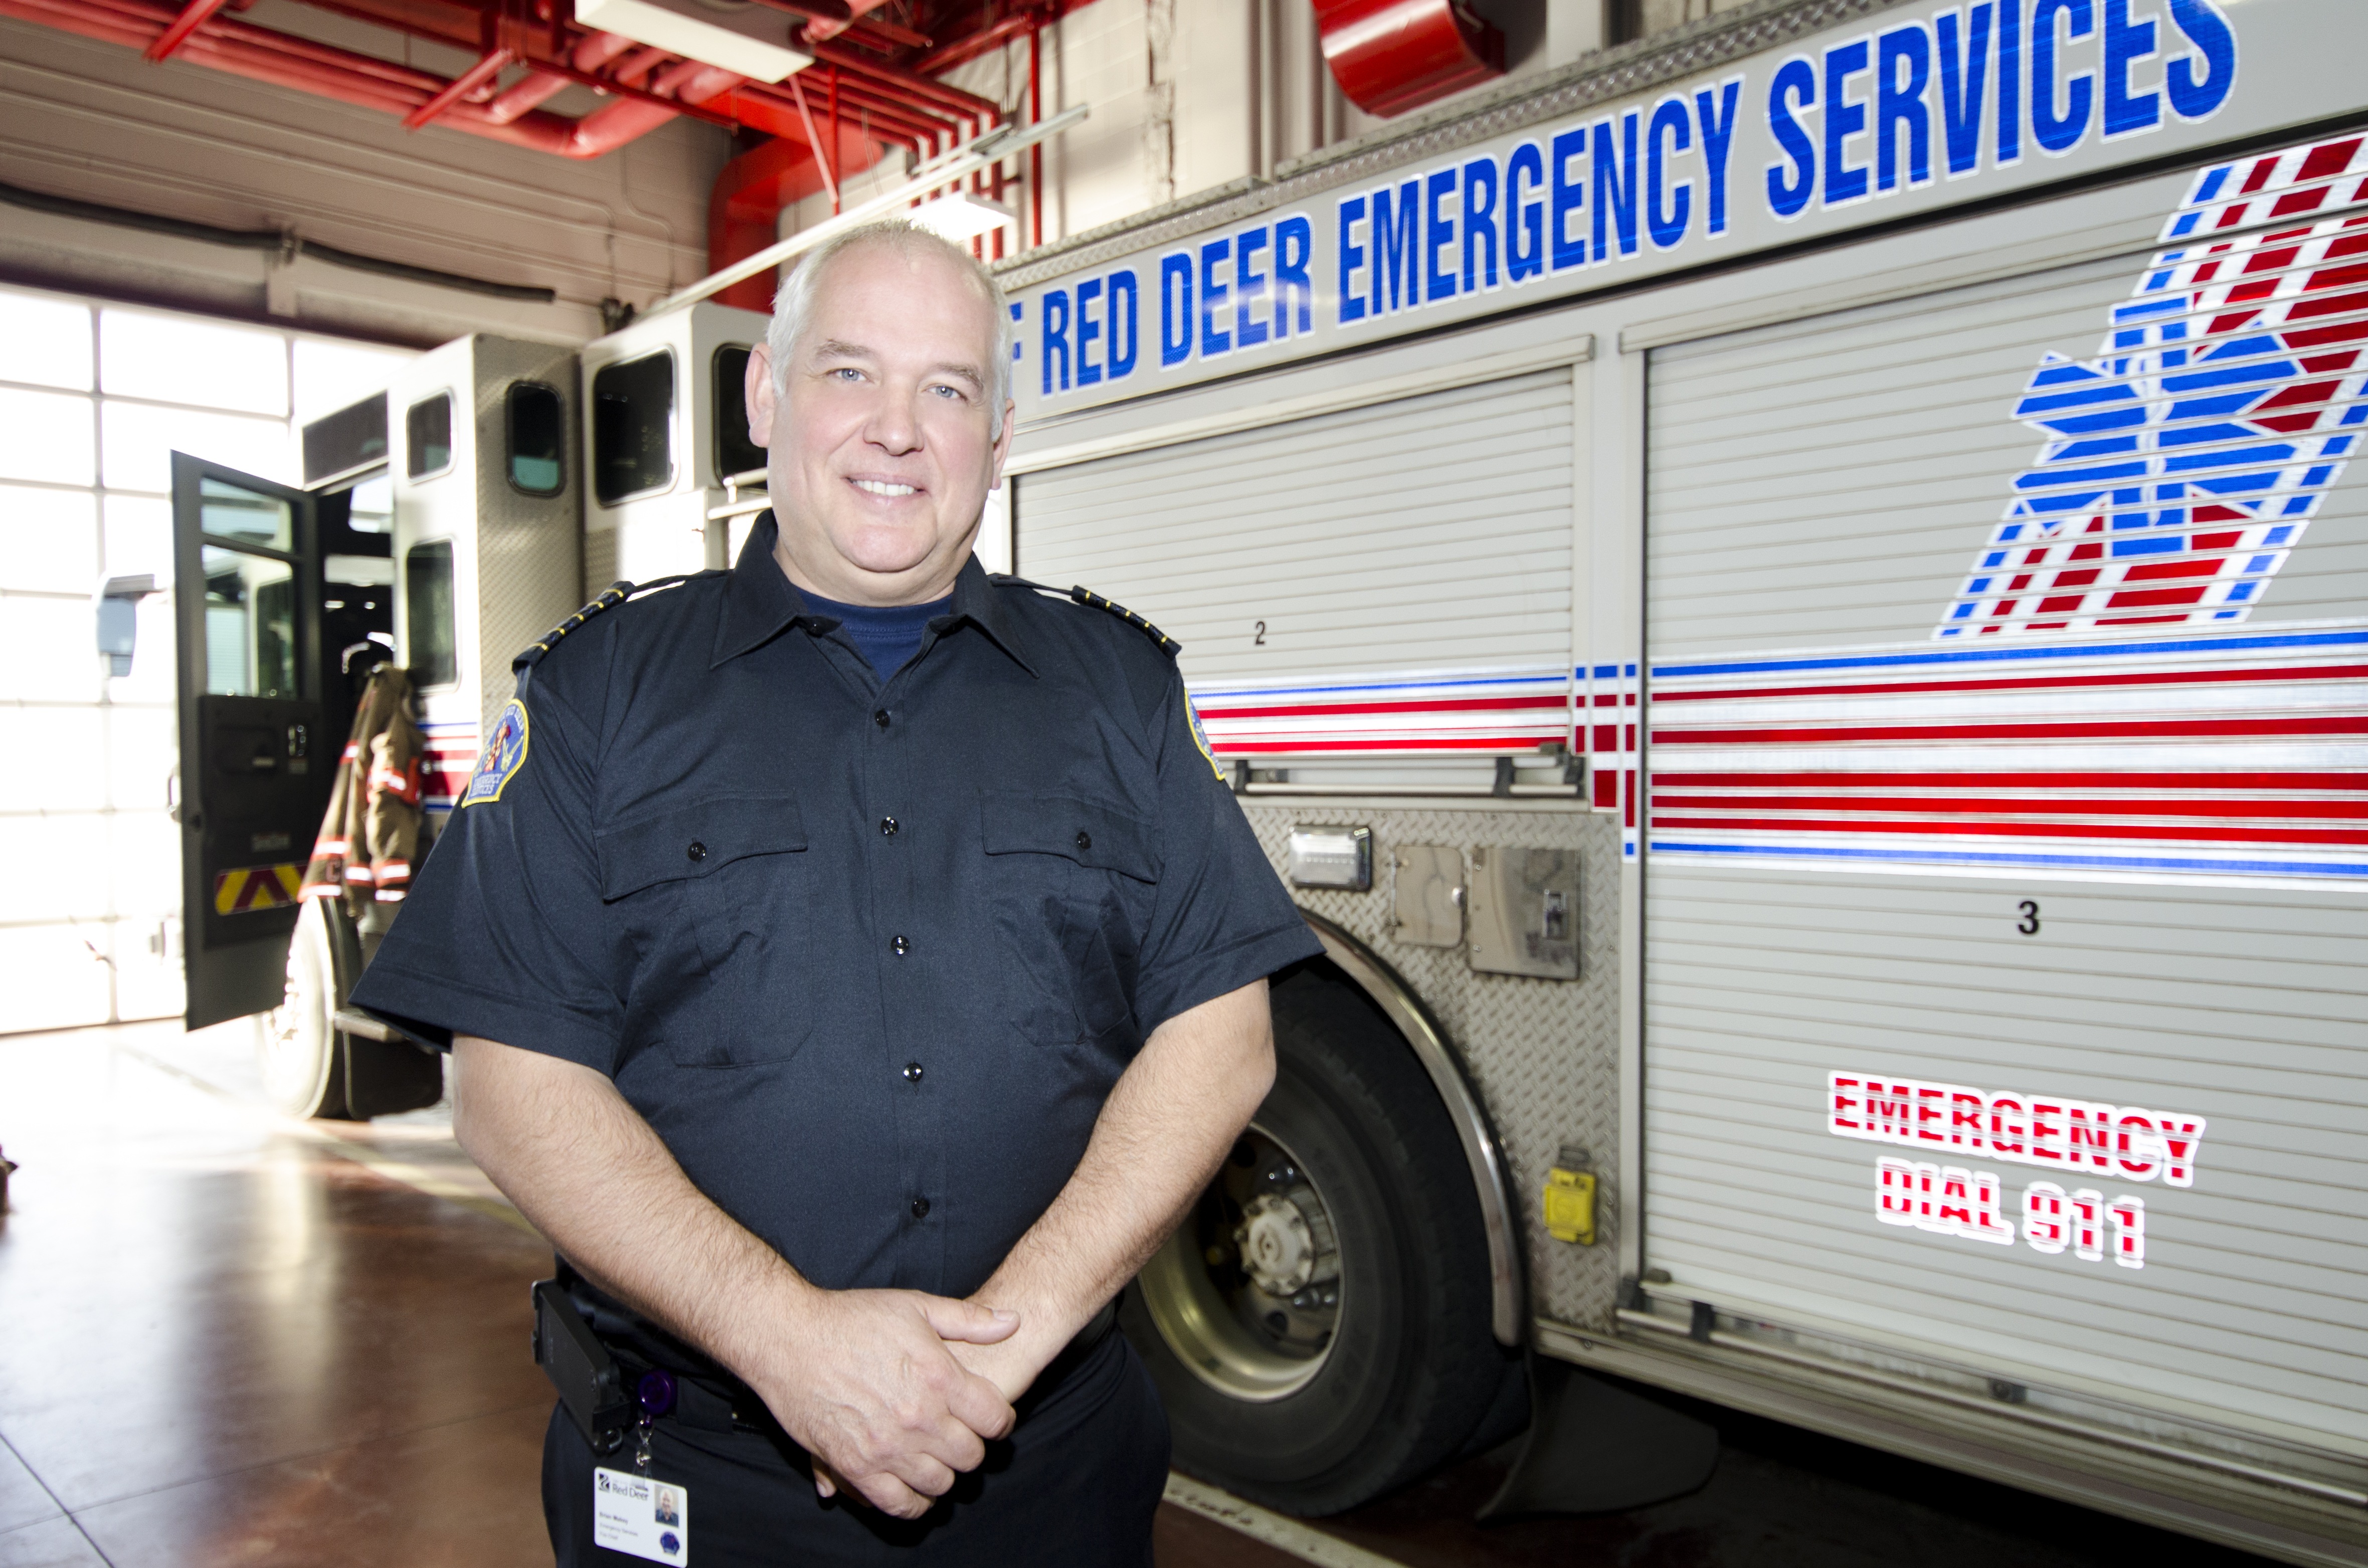 NEW POST – Red Deer Fire Chief Brian Makey stands in front of a fire engine at the 32nd St. station. Makey began his new position as the City’s fire chief last week.